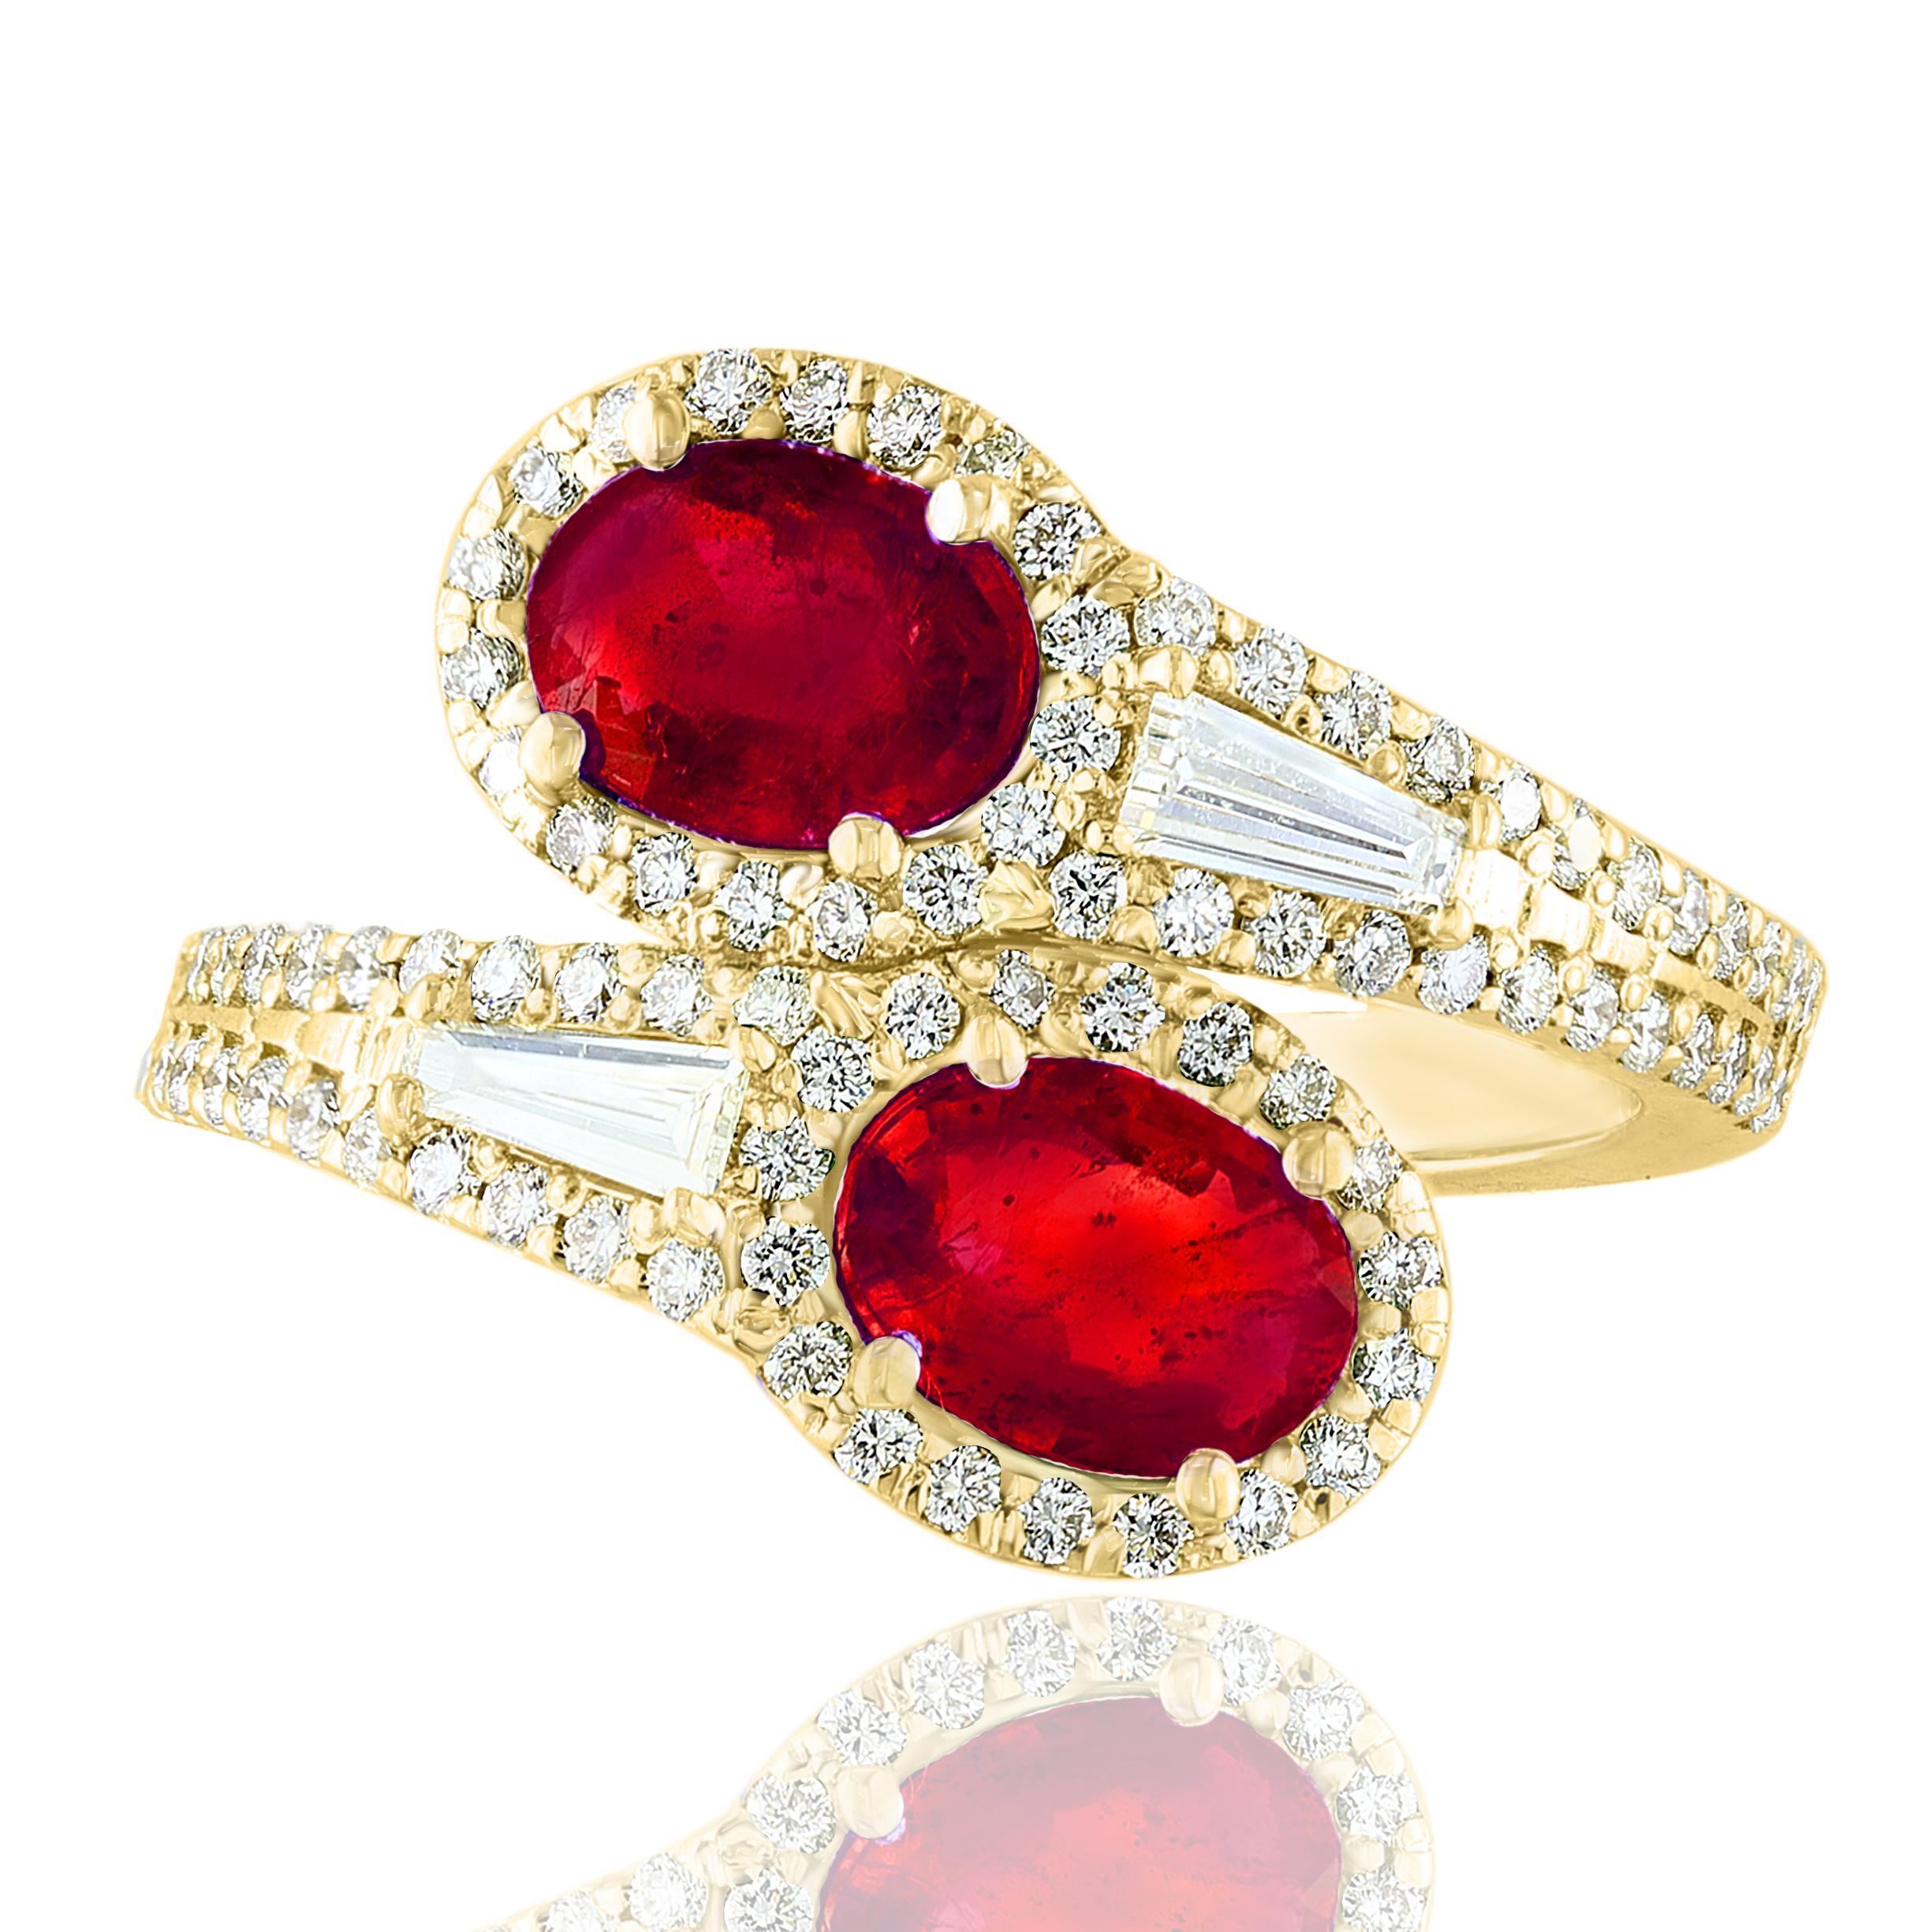 The stunning forever-together Toi et Moi ring features 2 Oval cut Rubies embraced by east to west 2 baguette diamonds weigh and 84 round diamonds halfway to the shank. Handcrafted in 14k Yellow Gold.
2 oval Rubies in the center weigh 1.67 carats and